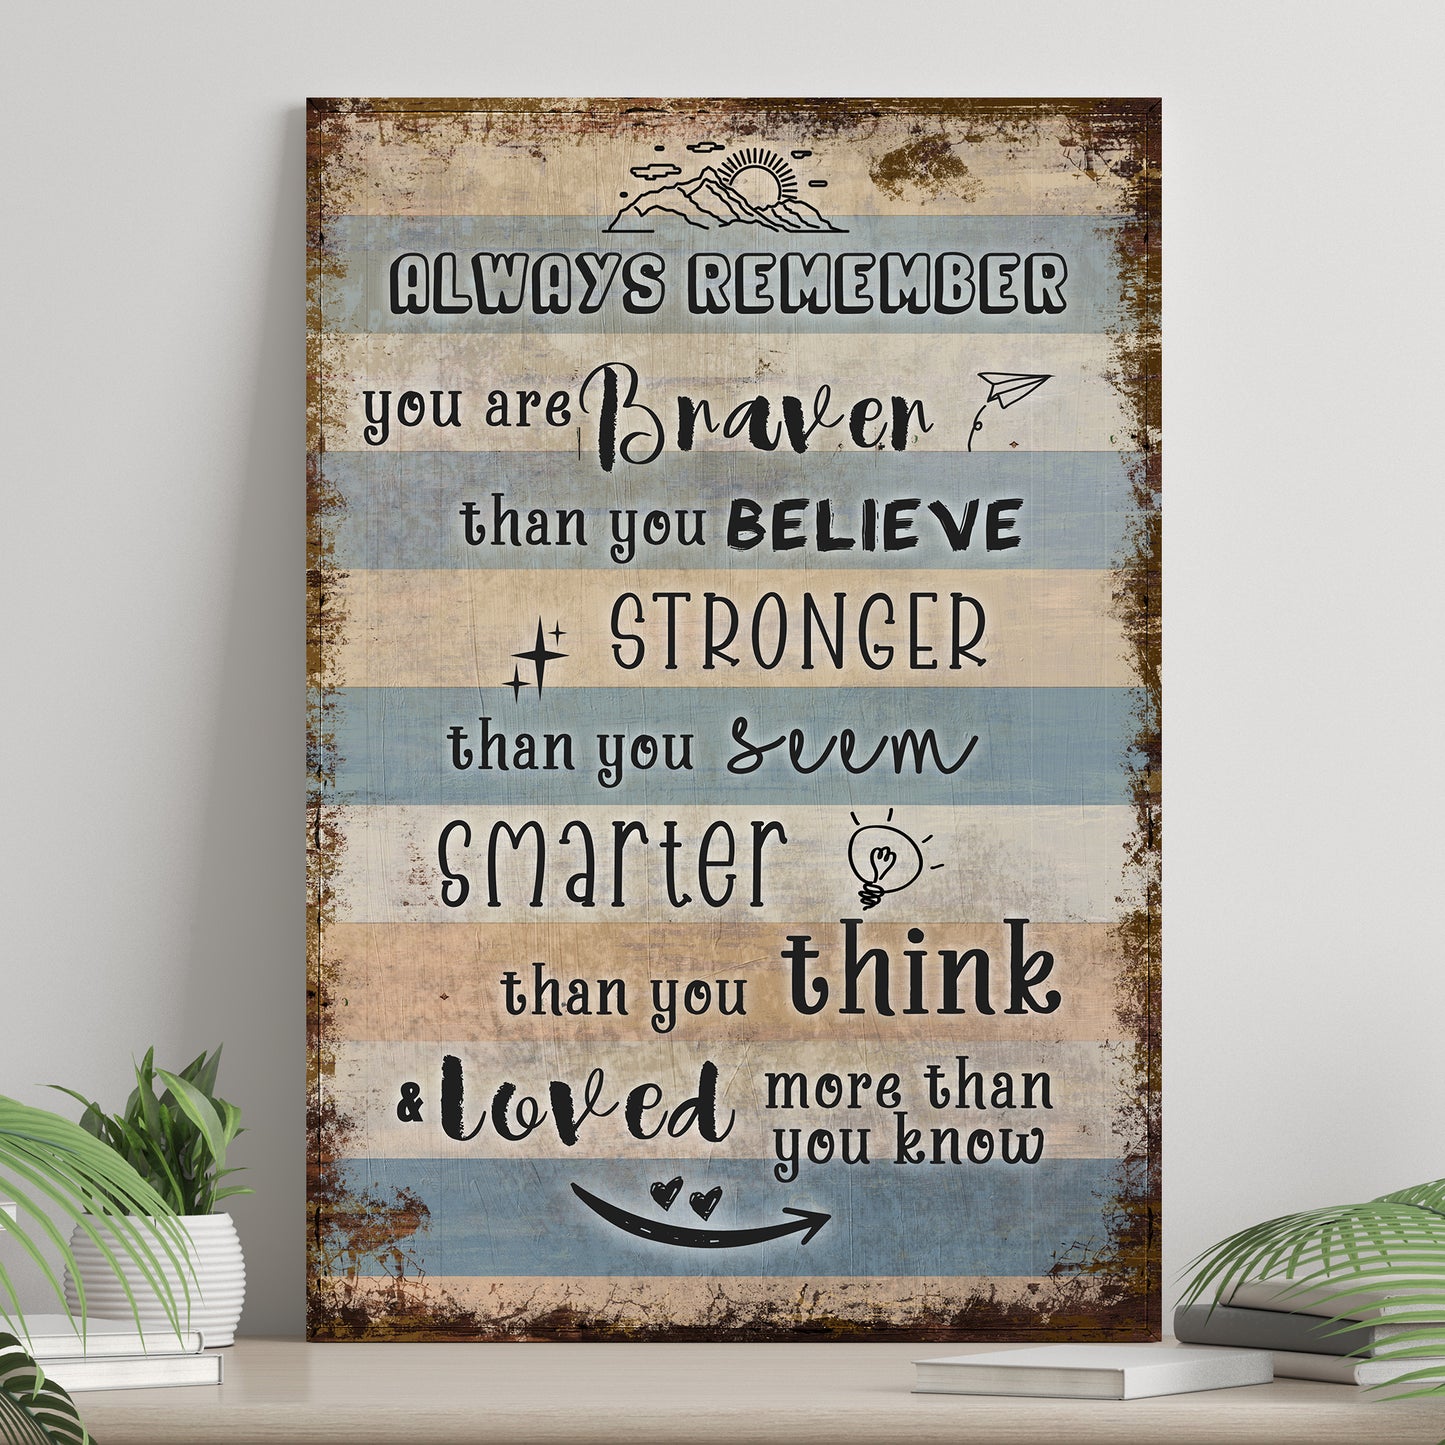 You Are Braver Than You Believe Sign - Image by Tailored Canvases